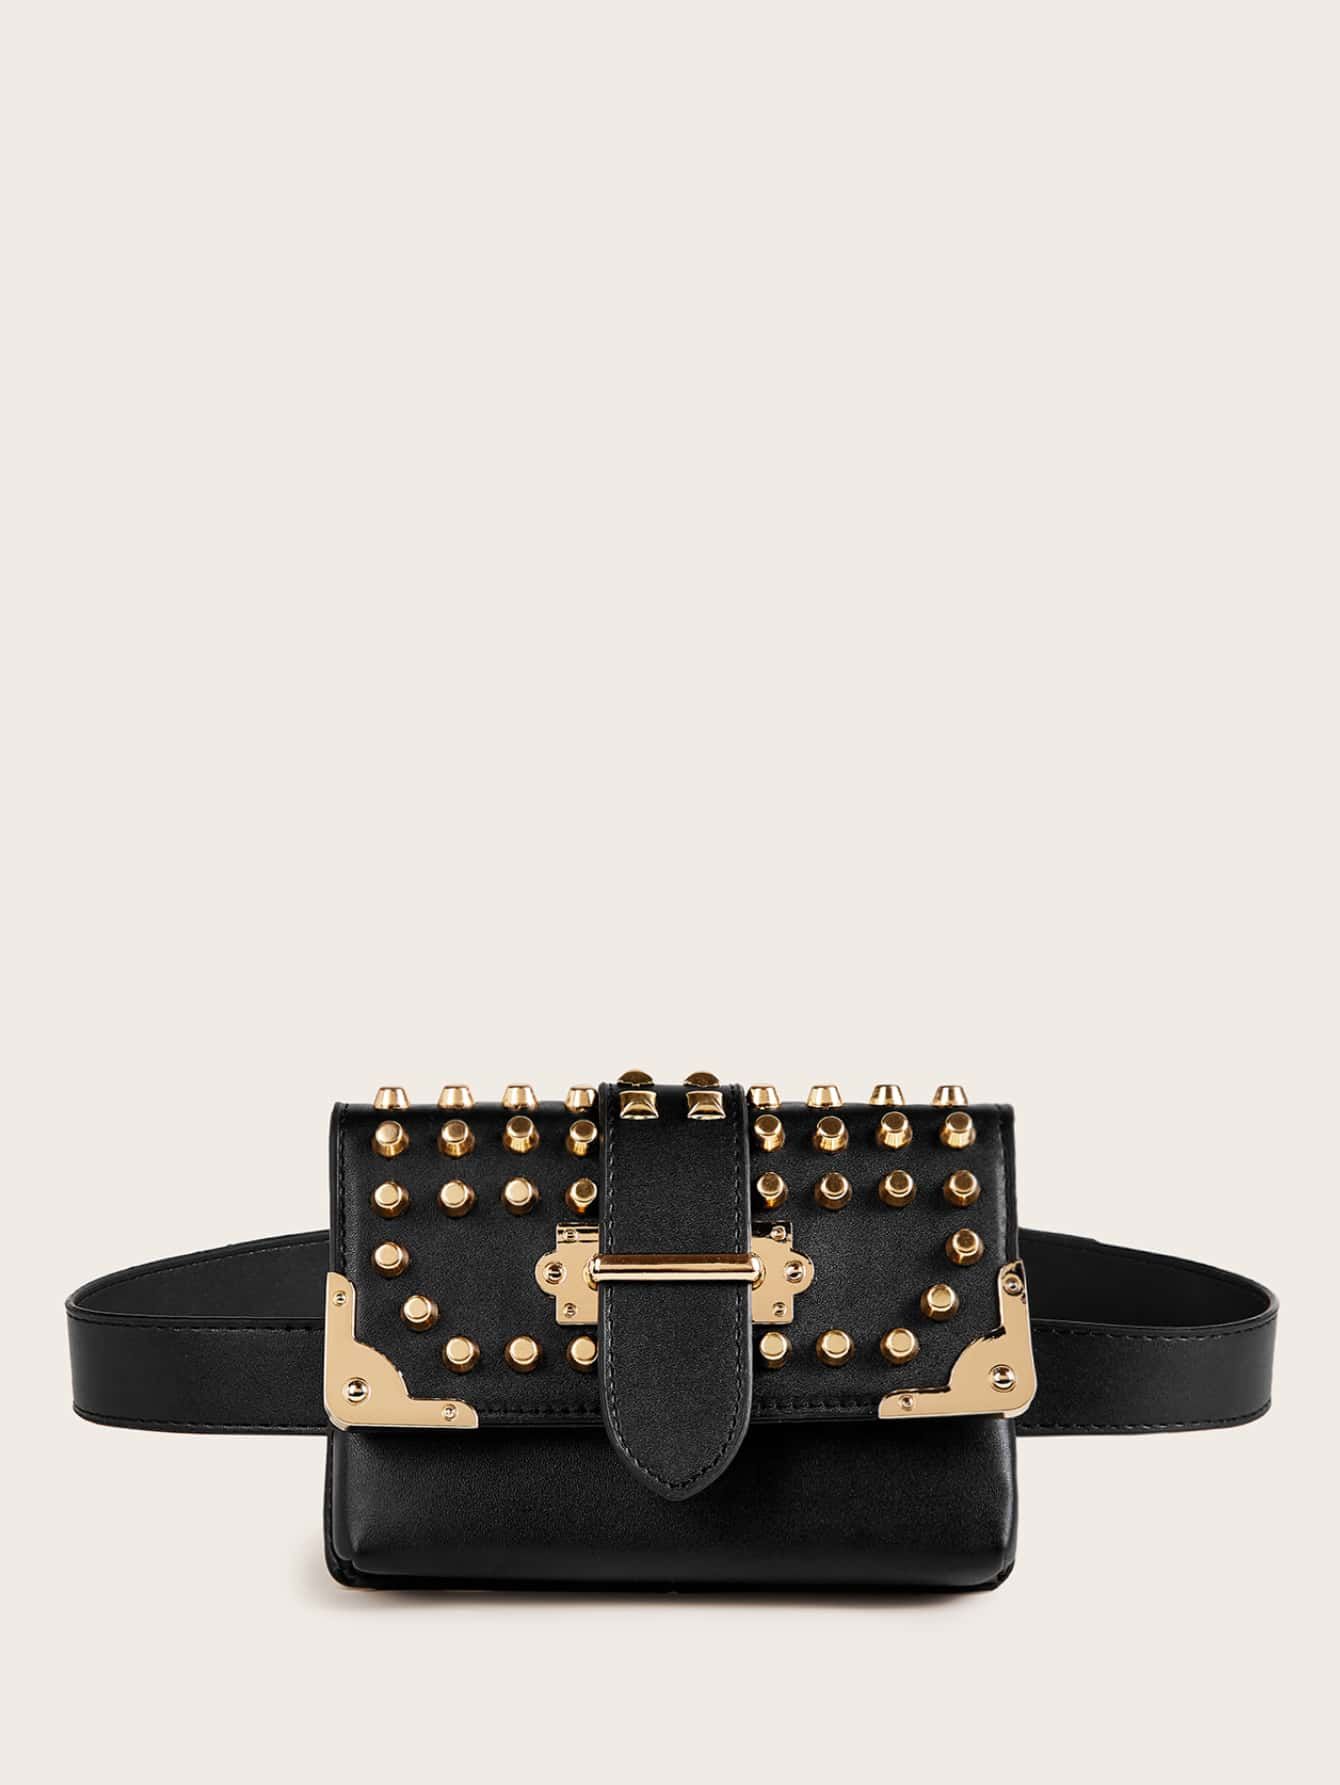 Studded Decor Fanny Pack | SHEIN